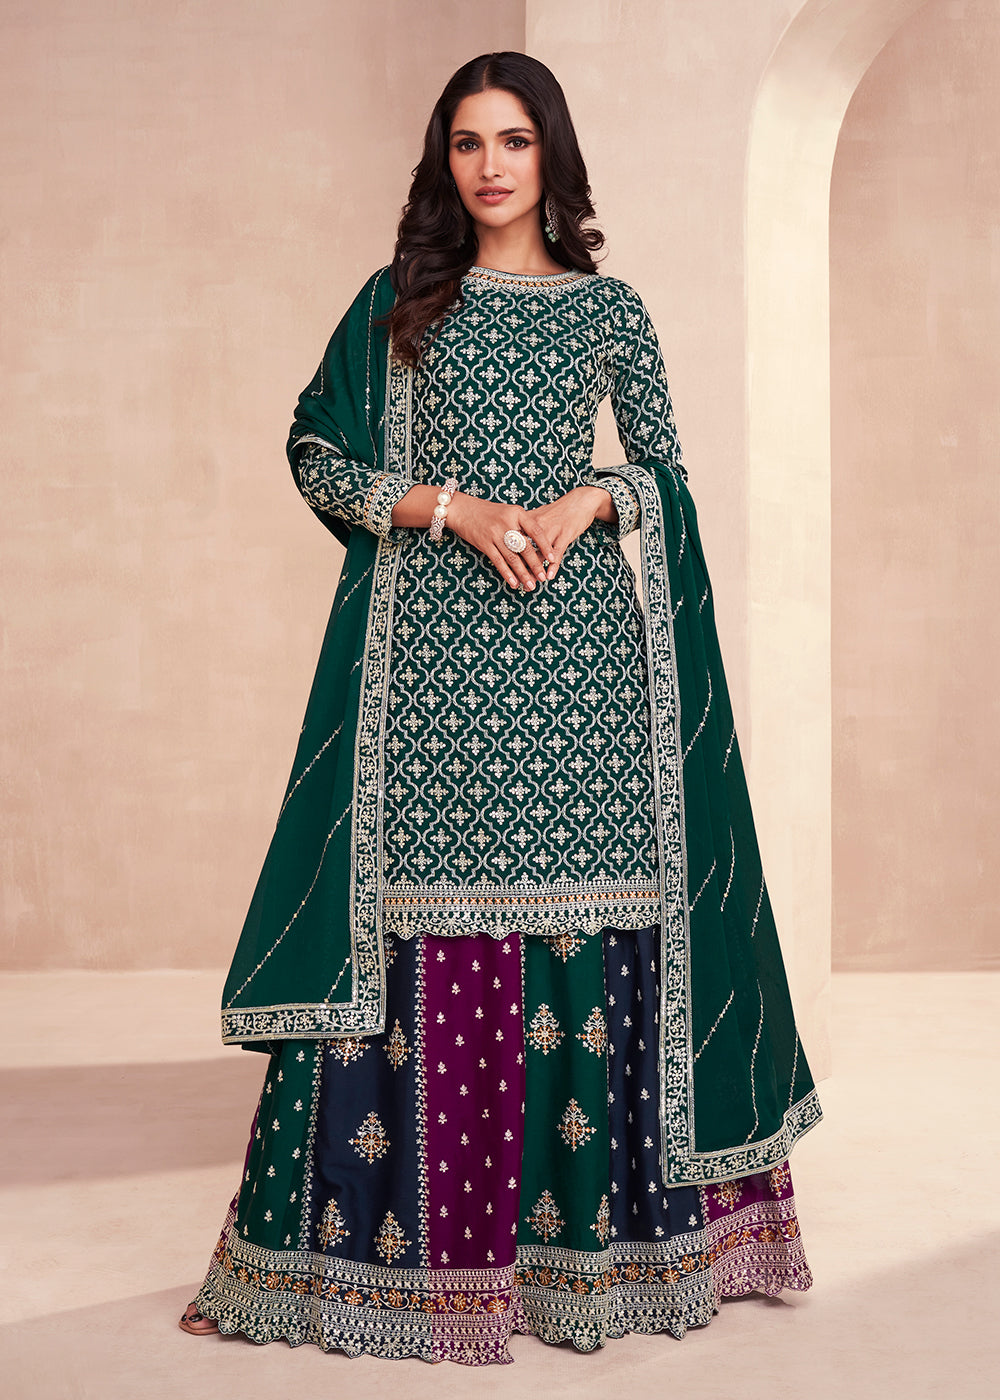 Buy Now Dark Green Multicolor Sequins Embroidered Lehenga Skirt Suit Online in USA, UK, Australia, New Zealand, Canada & Worldwide at Empress Clothing. 